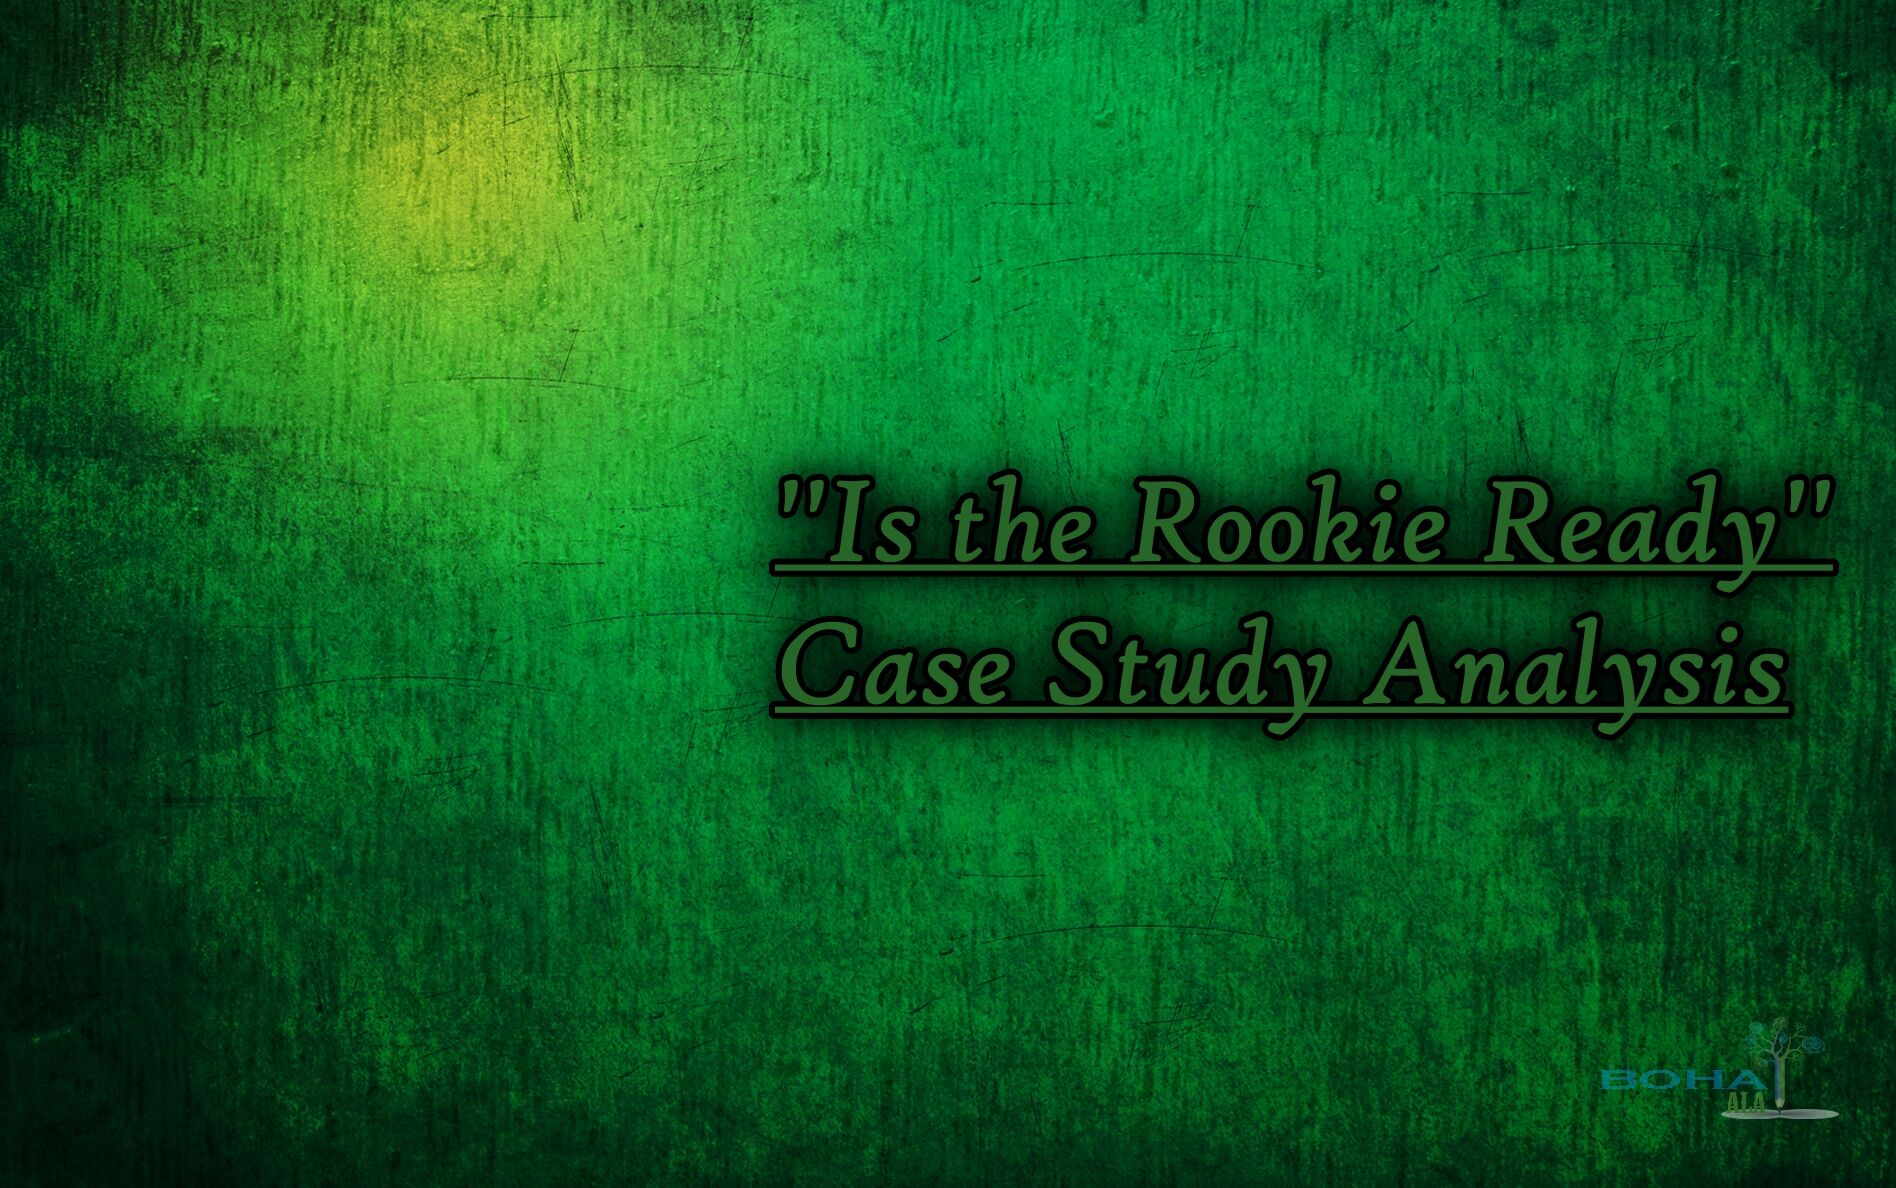 Is the Rookie Ready Case Study Analysis